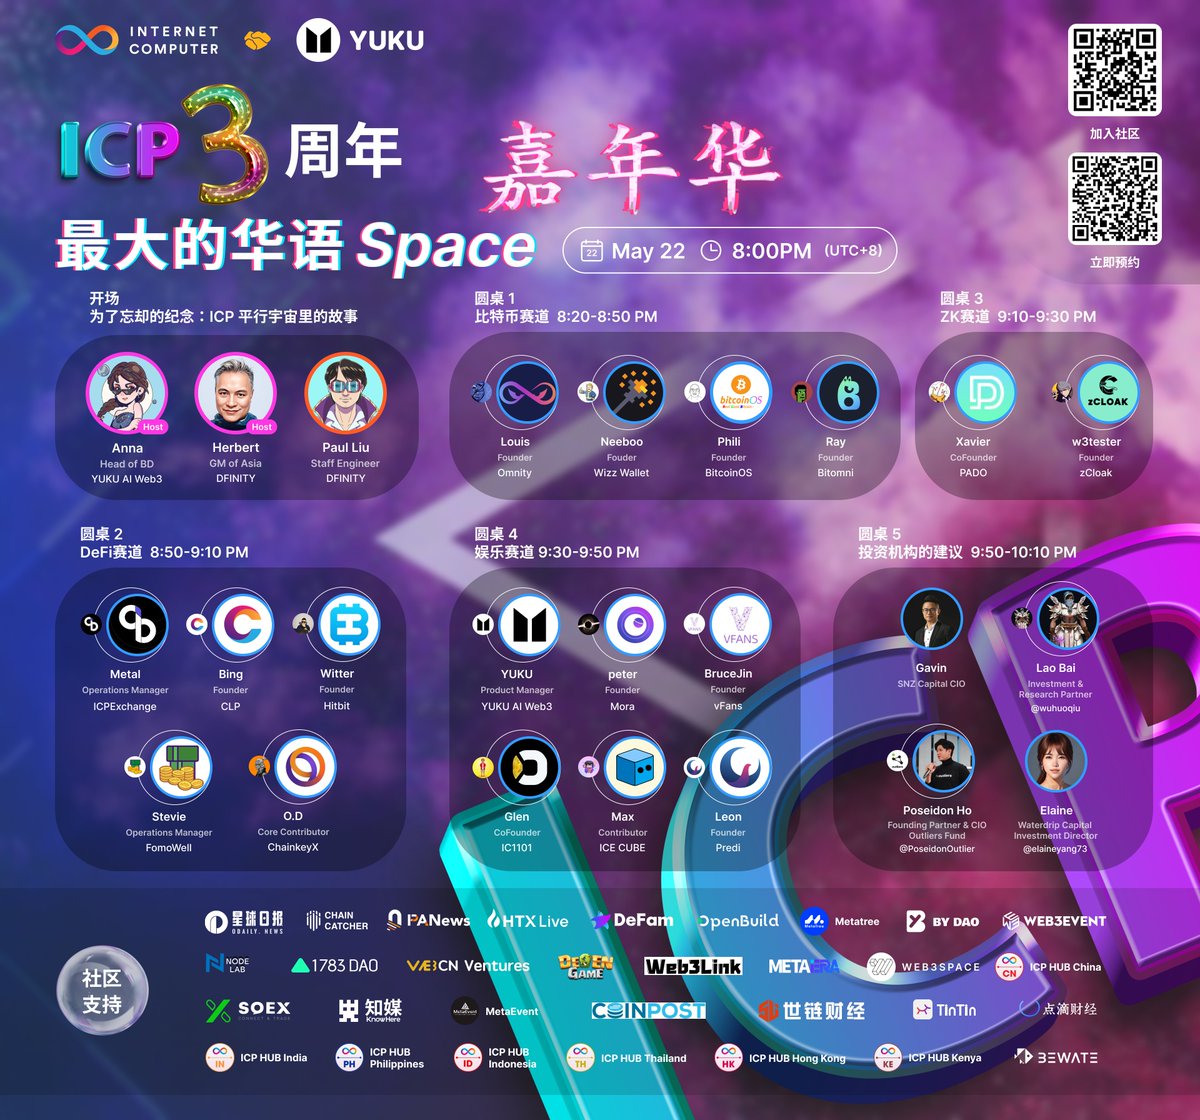 🔥 Join us for the biggest Chinese Twitter AMA, featuring over 20 speakers, to celebrate #ICP's 3rd anniversary! We'll explore ICP technology, share new insights, and introduce exciting projects. 🔗 AMA link: x.com/i/spaces/1drjz… 🎙️ Hosts: @herbertyang, @lockanna1,